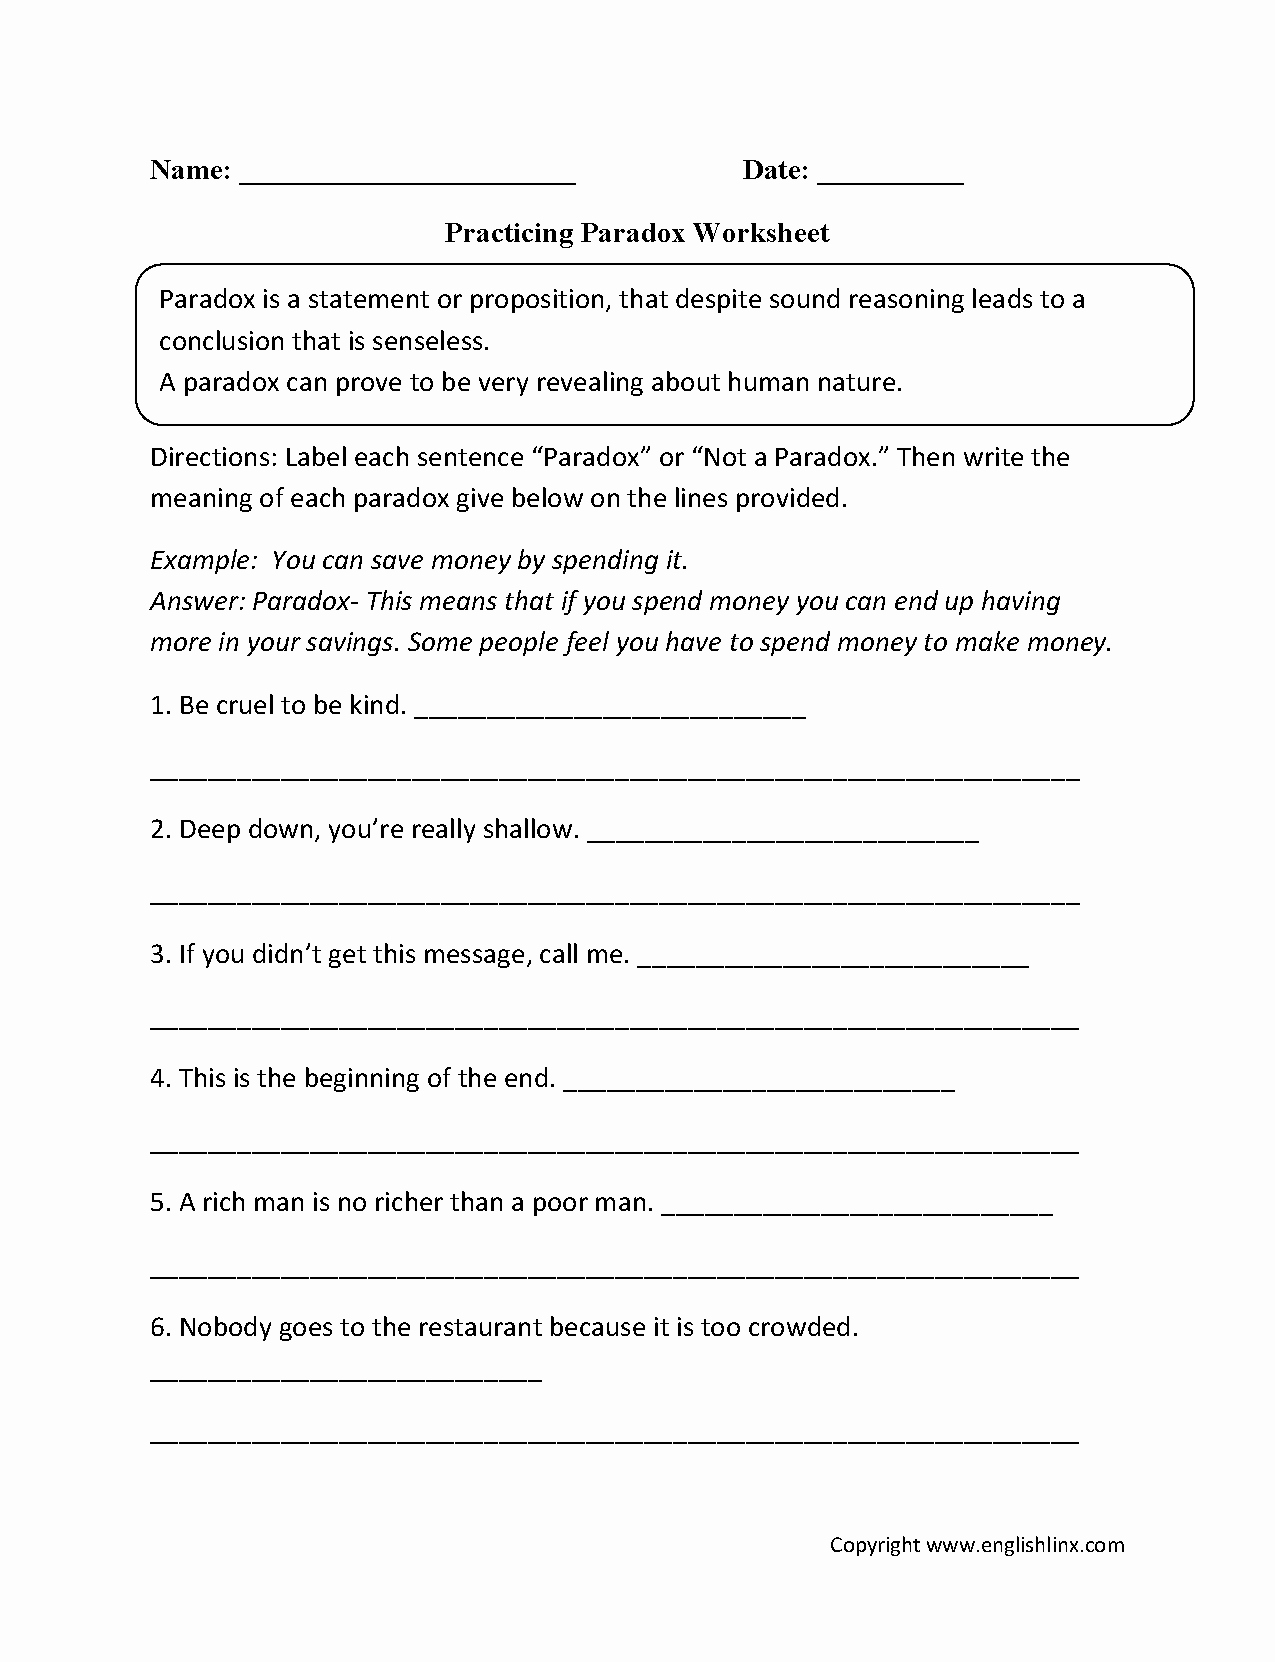 Figurative Language Review Worksheet Awesome Paradox Figurative Language Worksheets